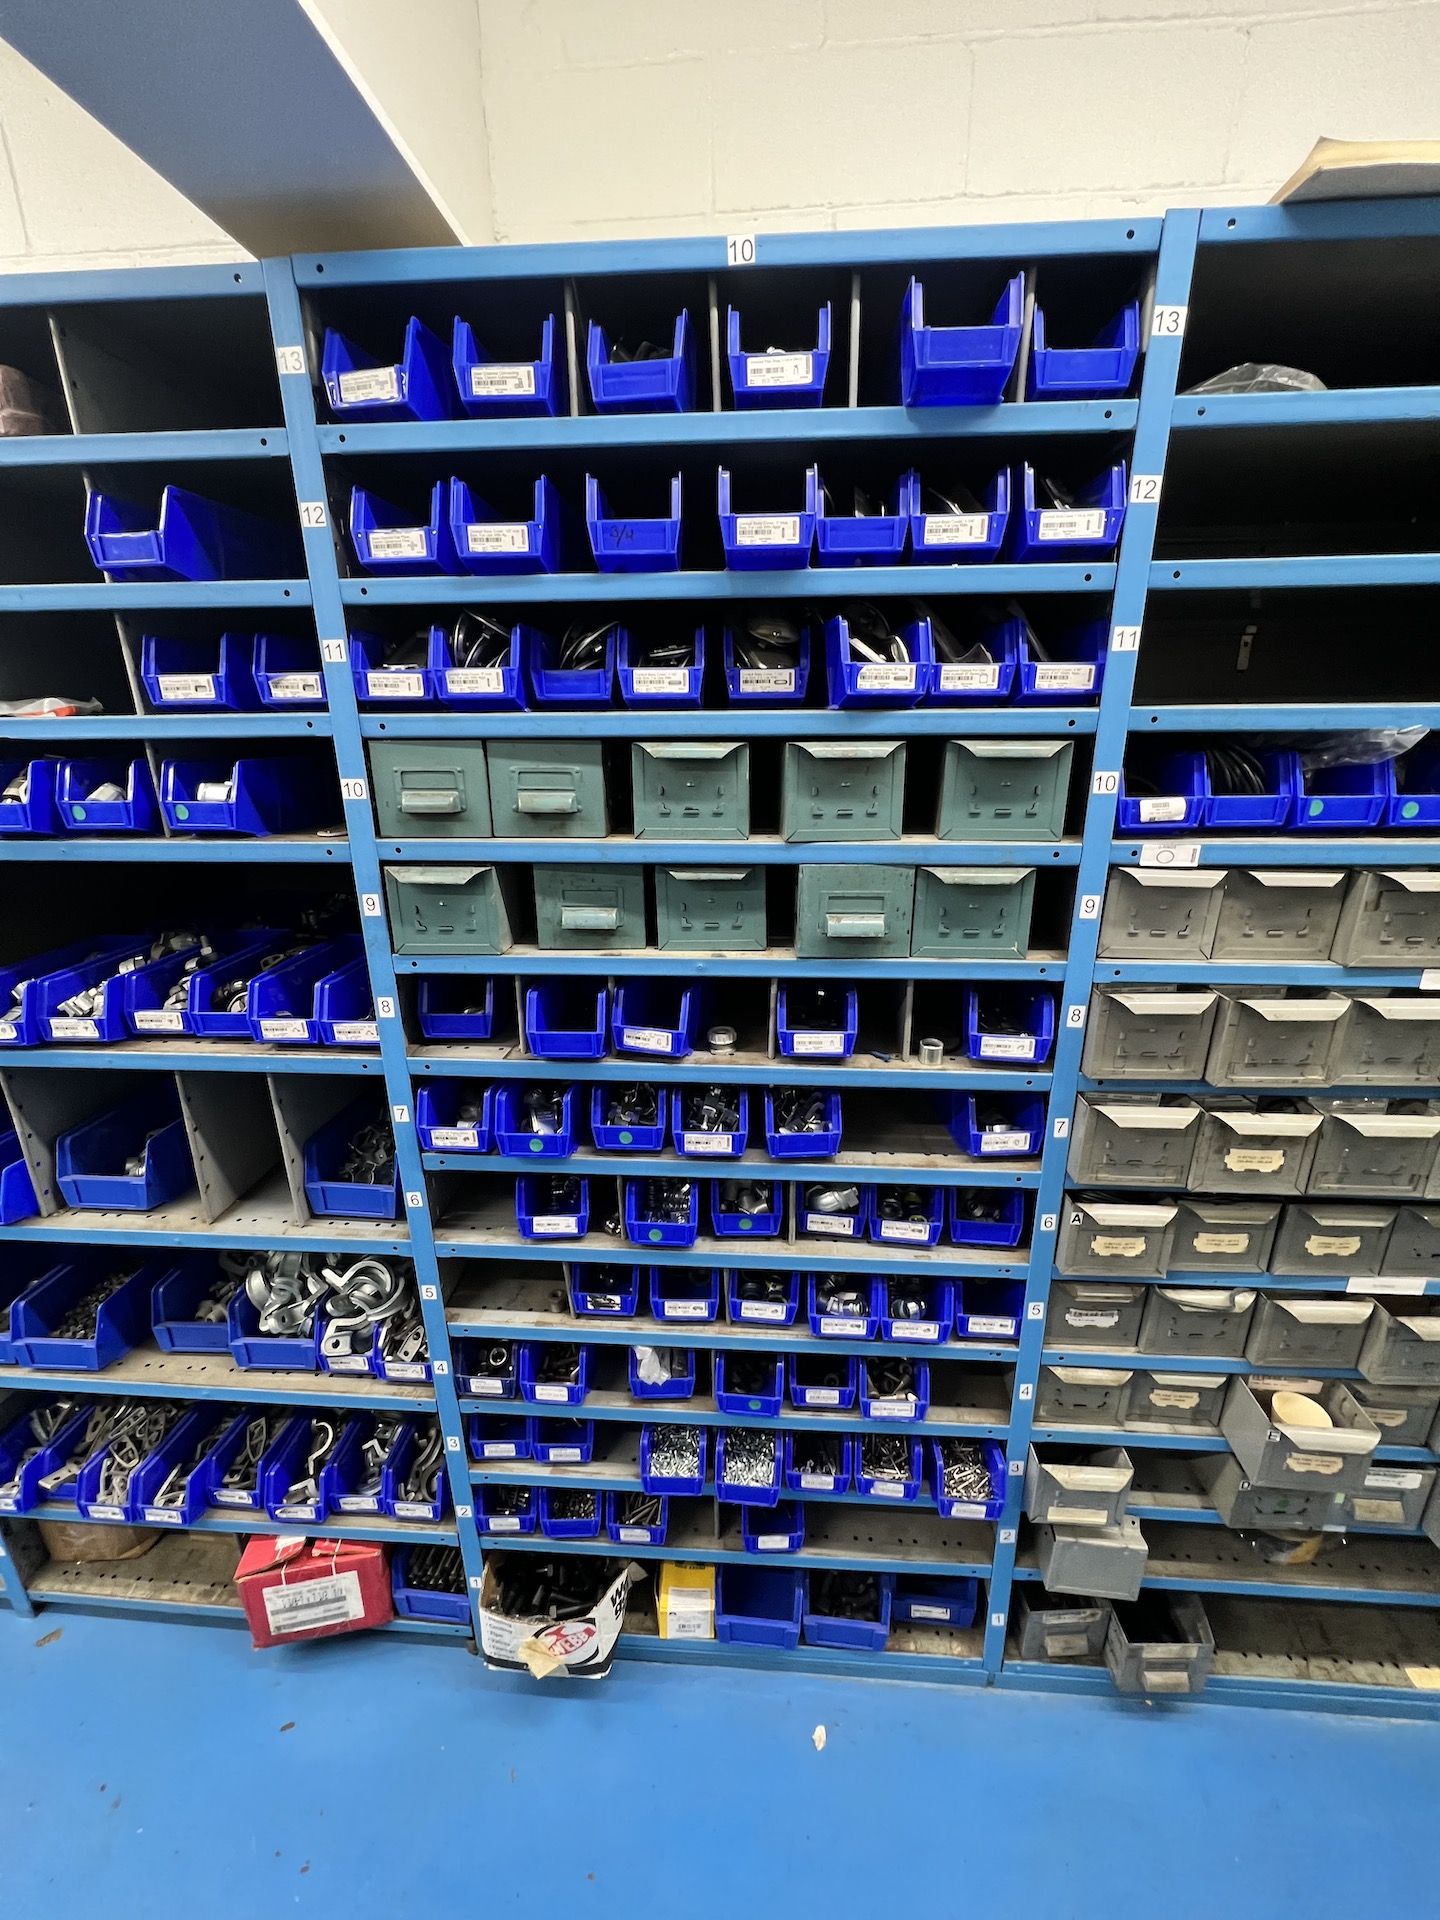 LOT OF ASSORTED PLUMBING FITTINGS, INCLUDES ELBOWS, COUPLINGS, UNIONS, ADAPTERS, AND MUCH MORE - Image 8 of 18